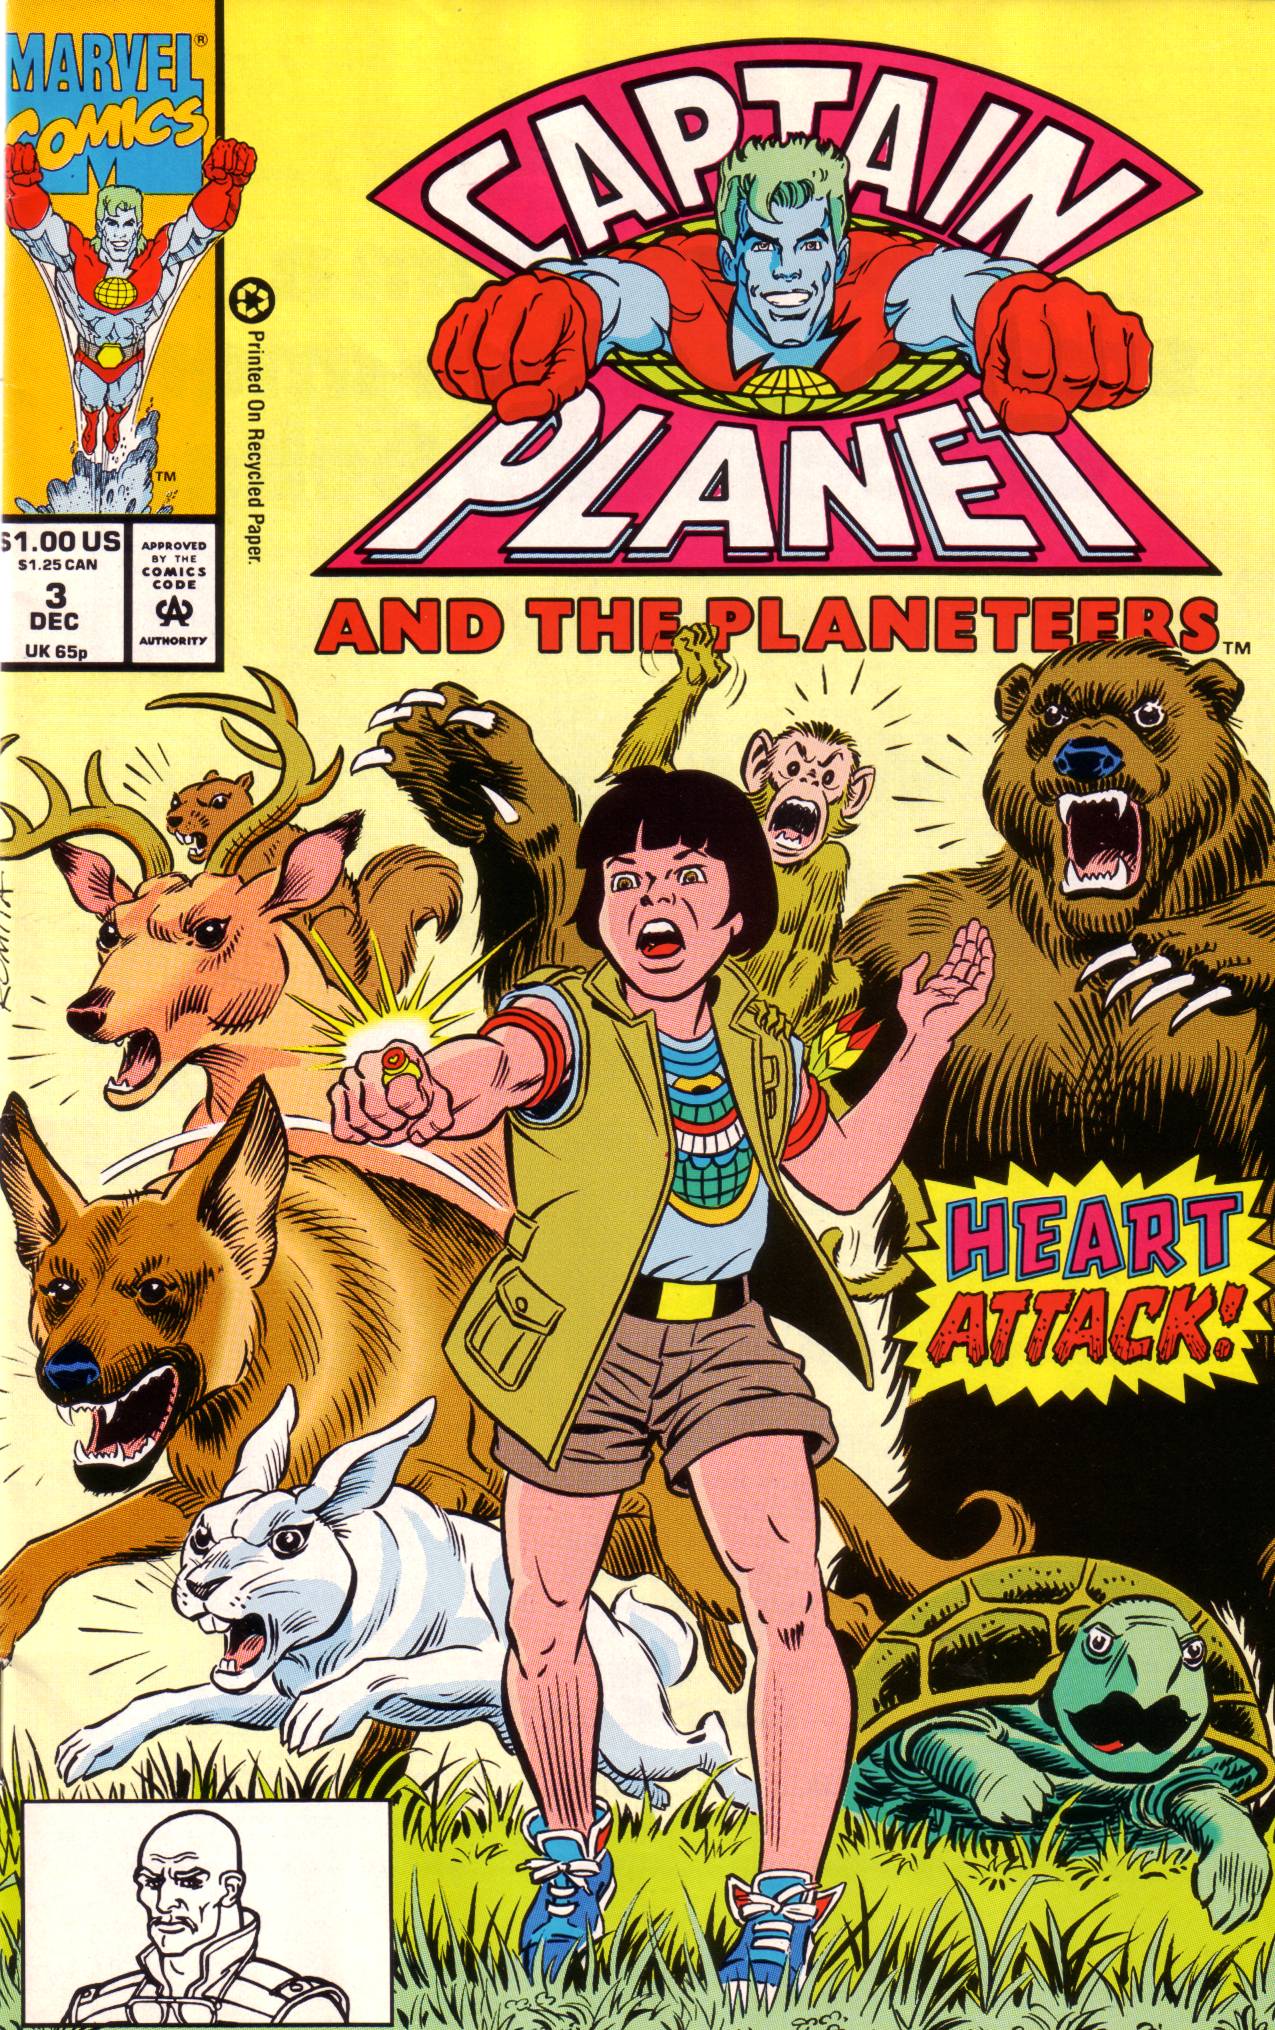 Shemale Captain Planet - Captain Planet And The Planeteers Issue 3 | Read Captain Planet And The  Planeteers Issue 3 comic online in high quality. Read Full Comic online for  free - Read comics online in